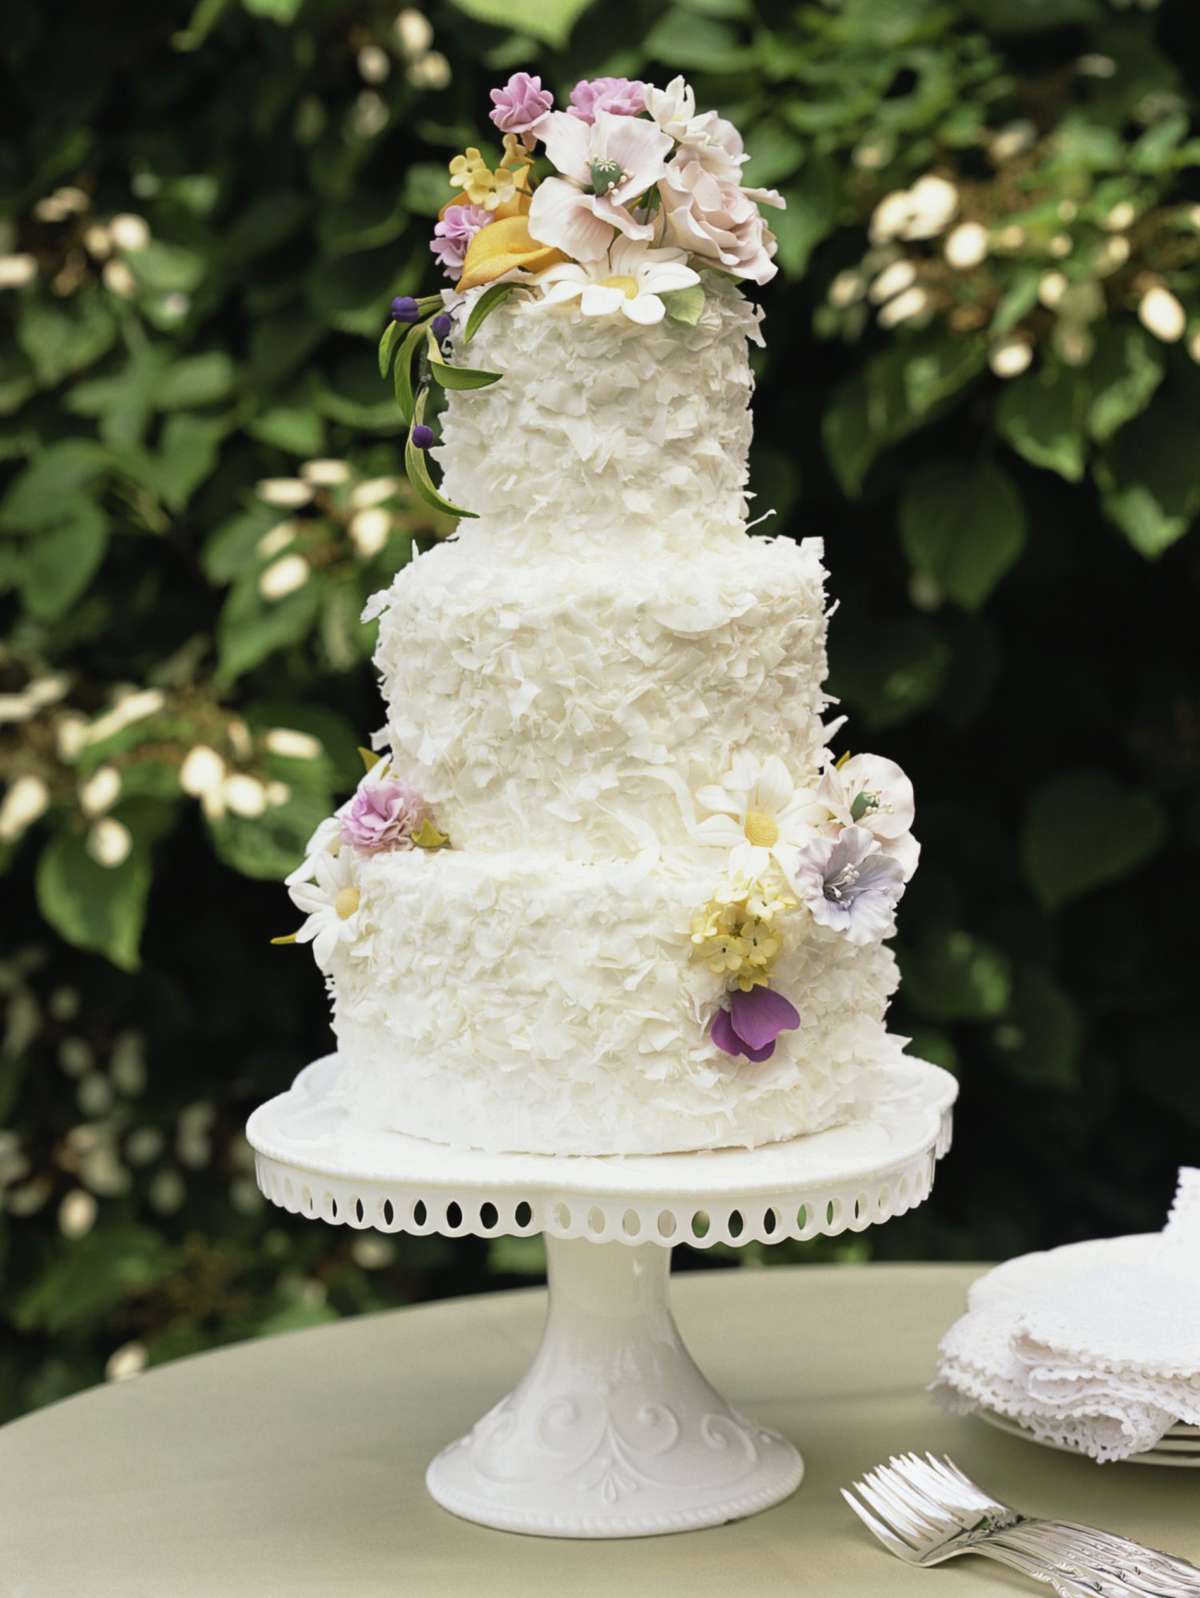 Wedding Cakes Glossary Of Terms Definition Of Wedding Cake Terms Instyle,Modern Kitchen Designs For Small Kitchens